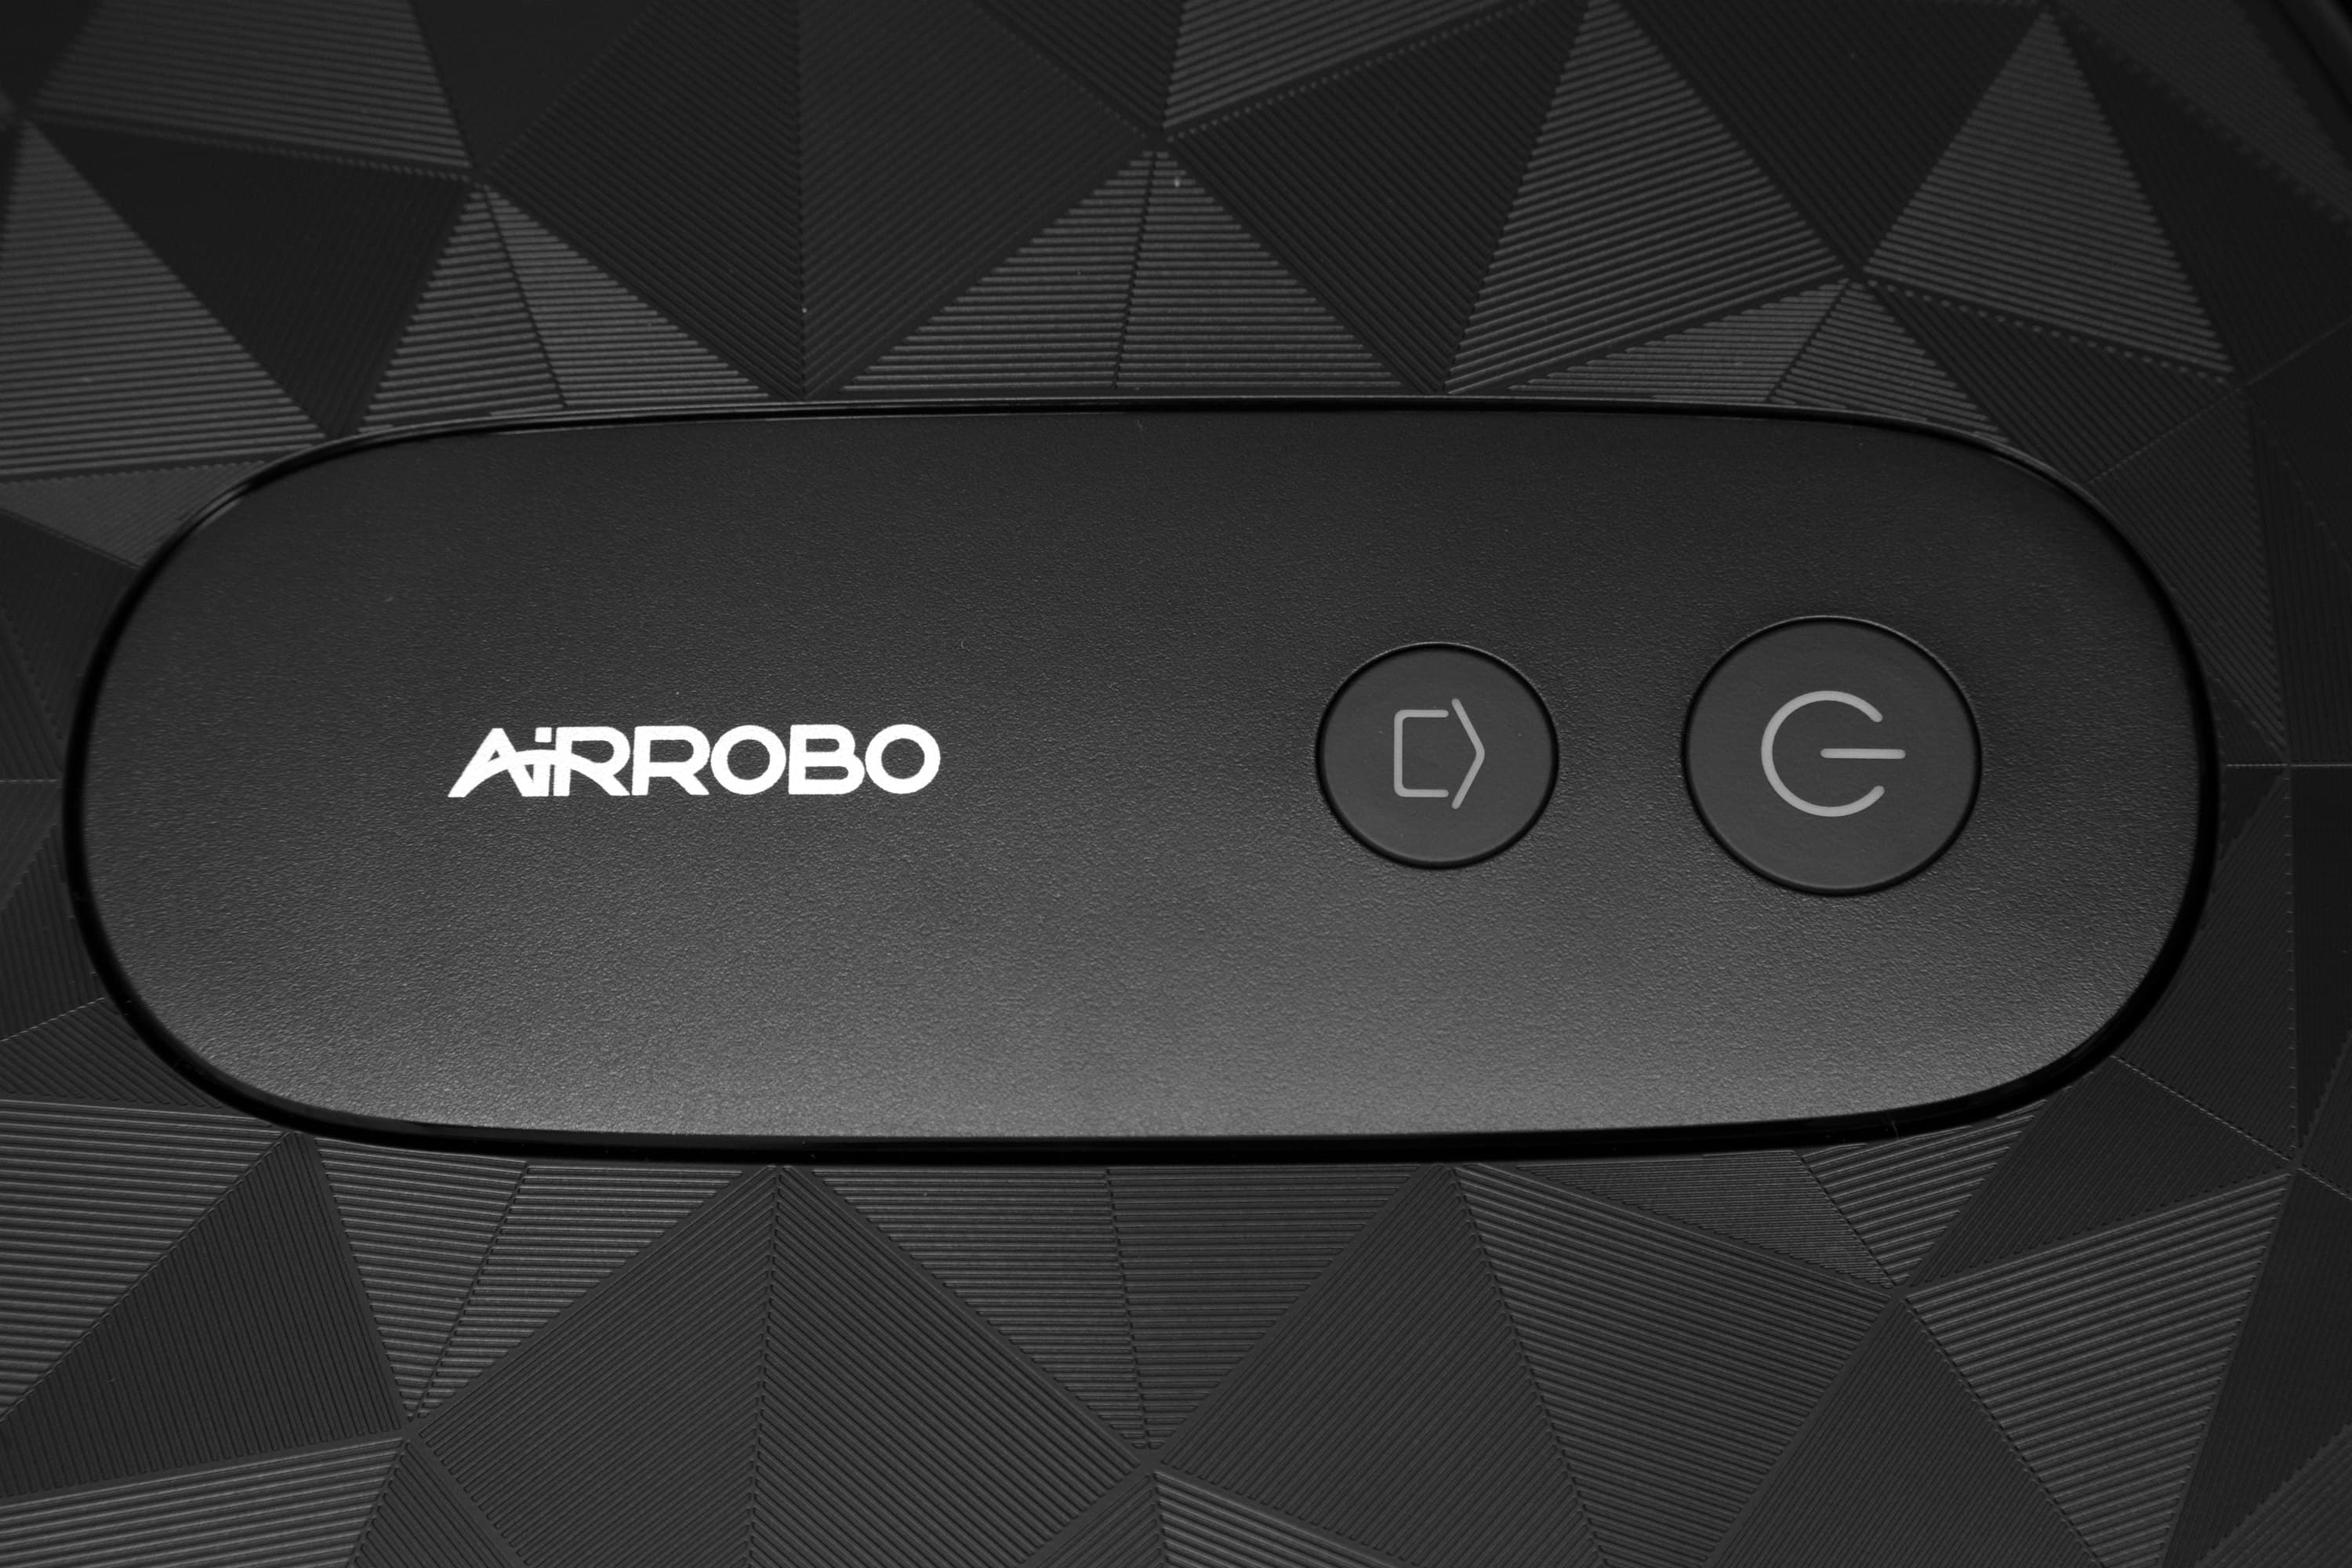 Airrobo P20 provides a cleaning house for you #pfy #foryou #airrobo #f